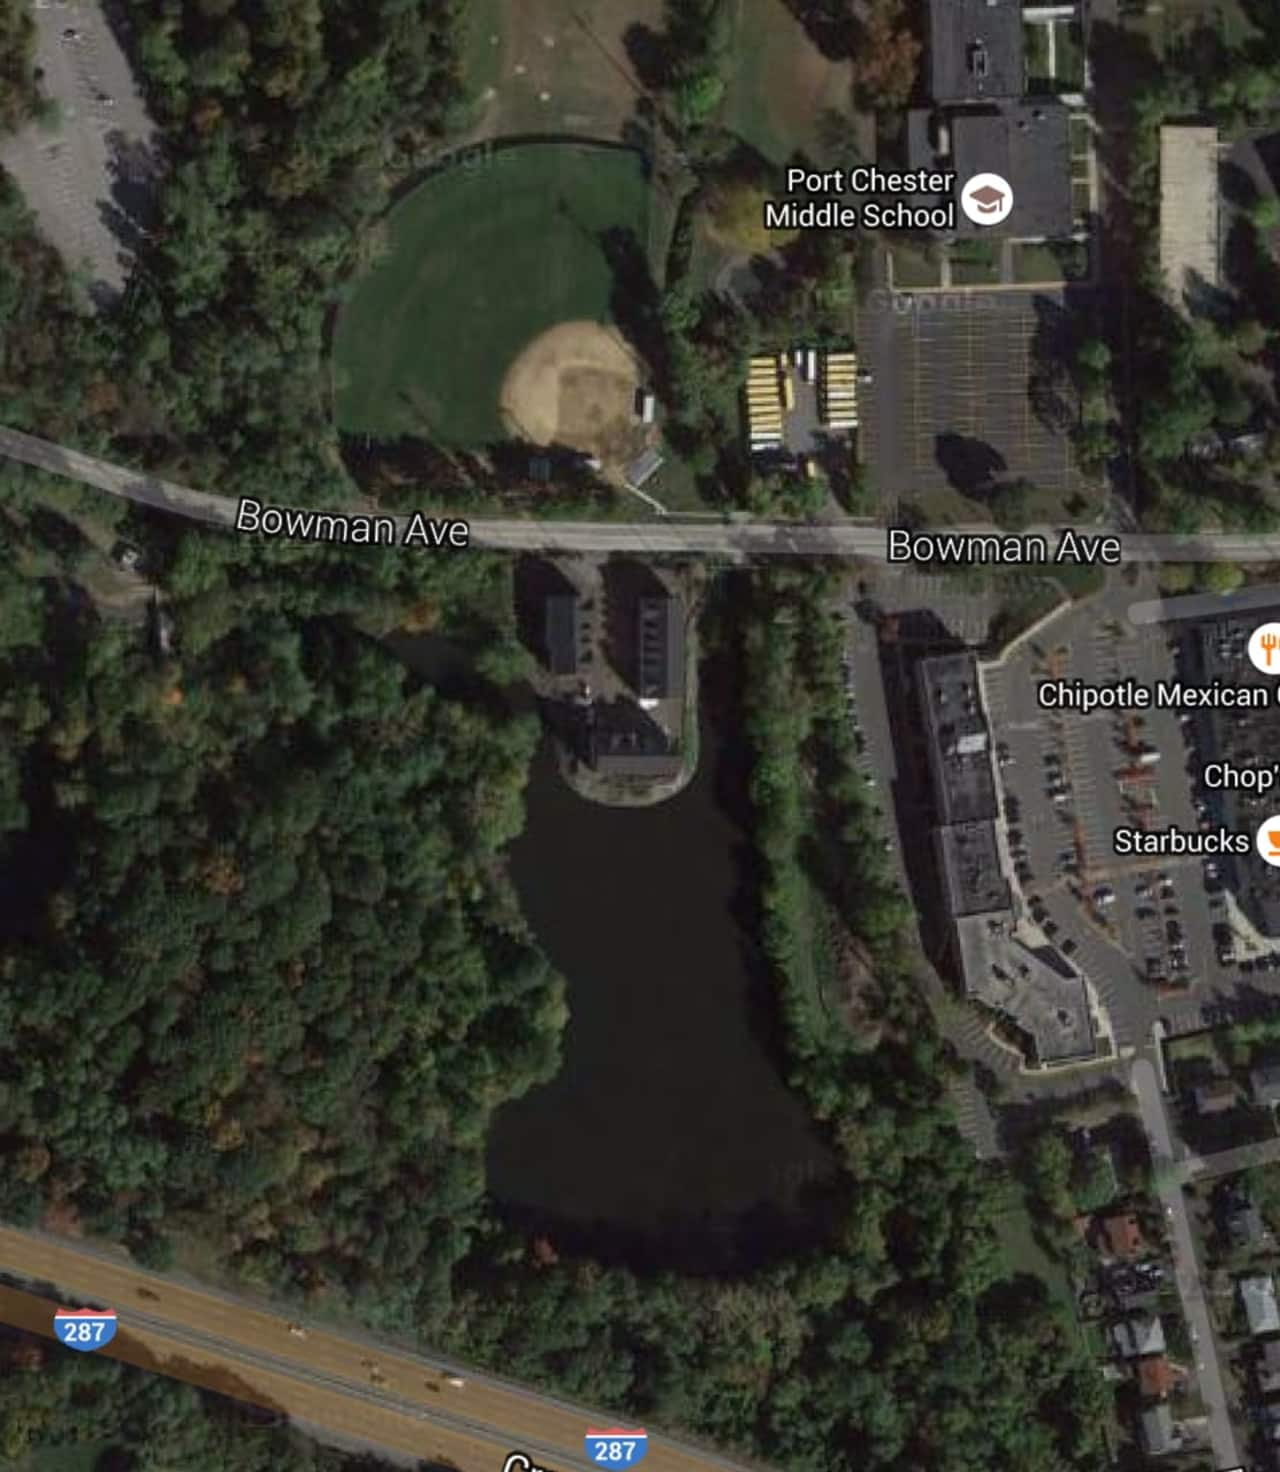 The Bowman Avenue Dam is located just off I-287 in Rye Brook, near Rye's border with Harrison. Iranian computer hackers who were indicted Thursday accessed the dam's computer in 2013, but failed to breach its water controls, federal prosecutors said.